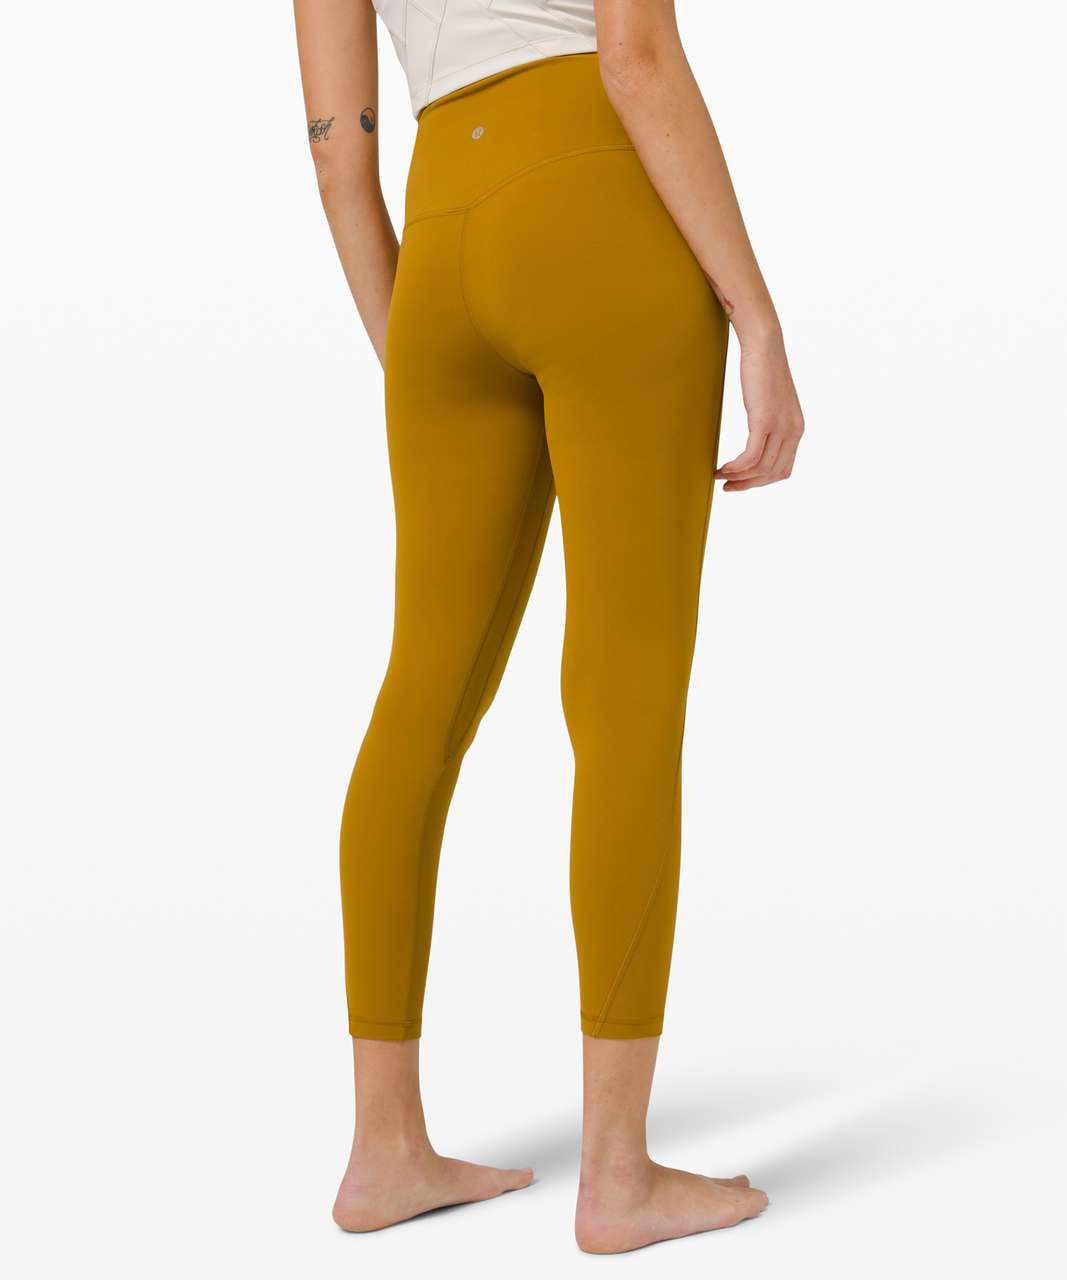 Lululemon Unlimit High-Rise Tight 25" - Gold Spice